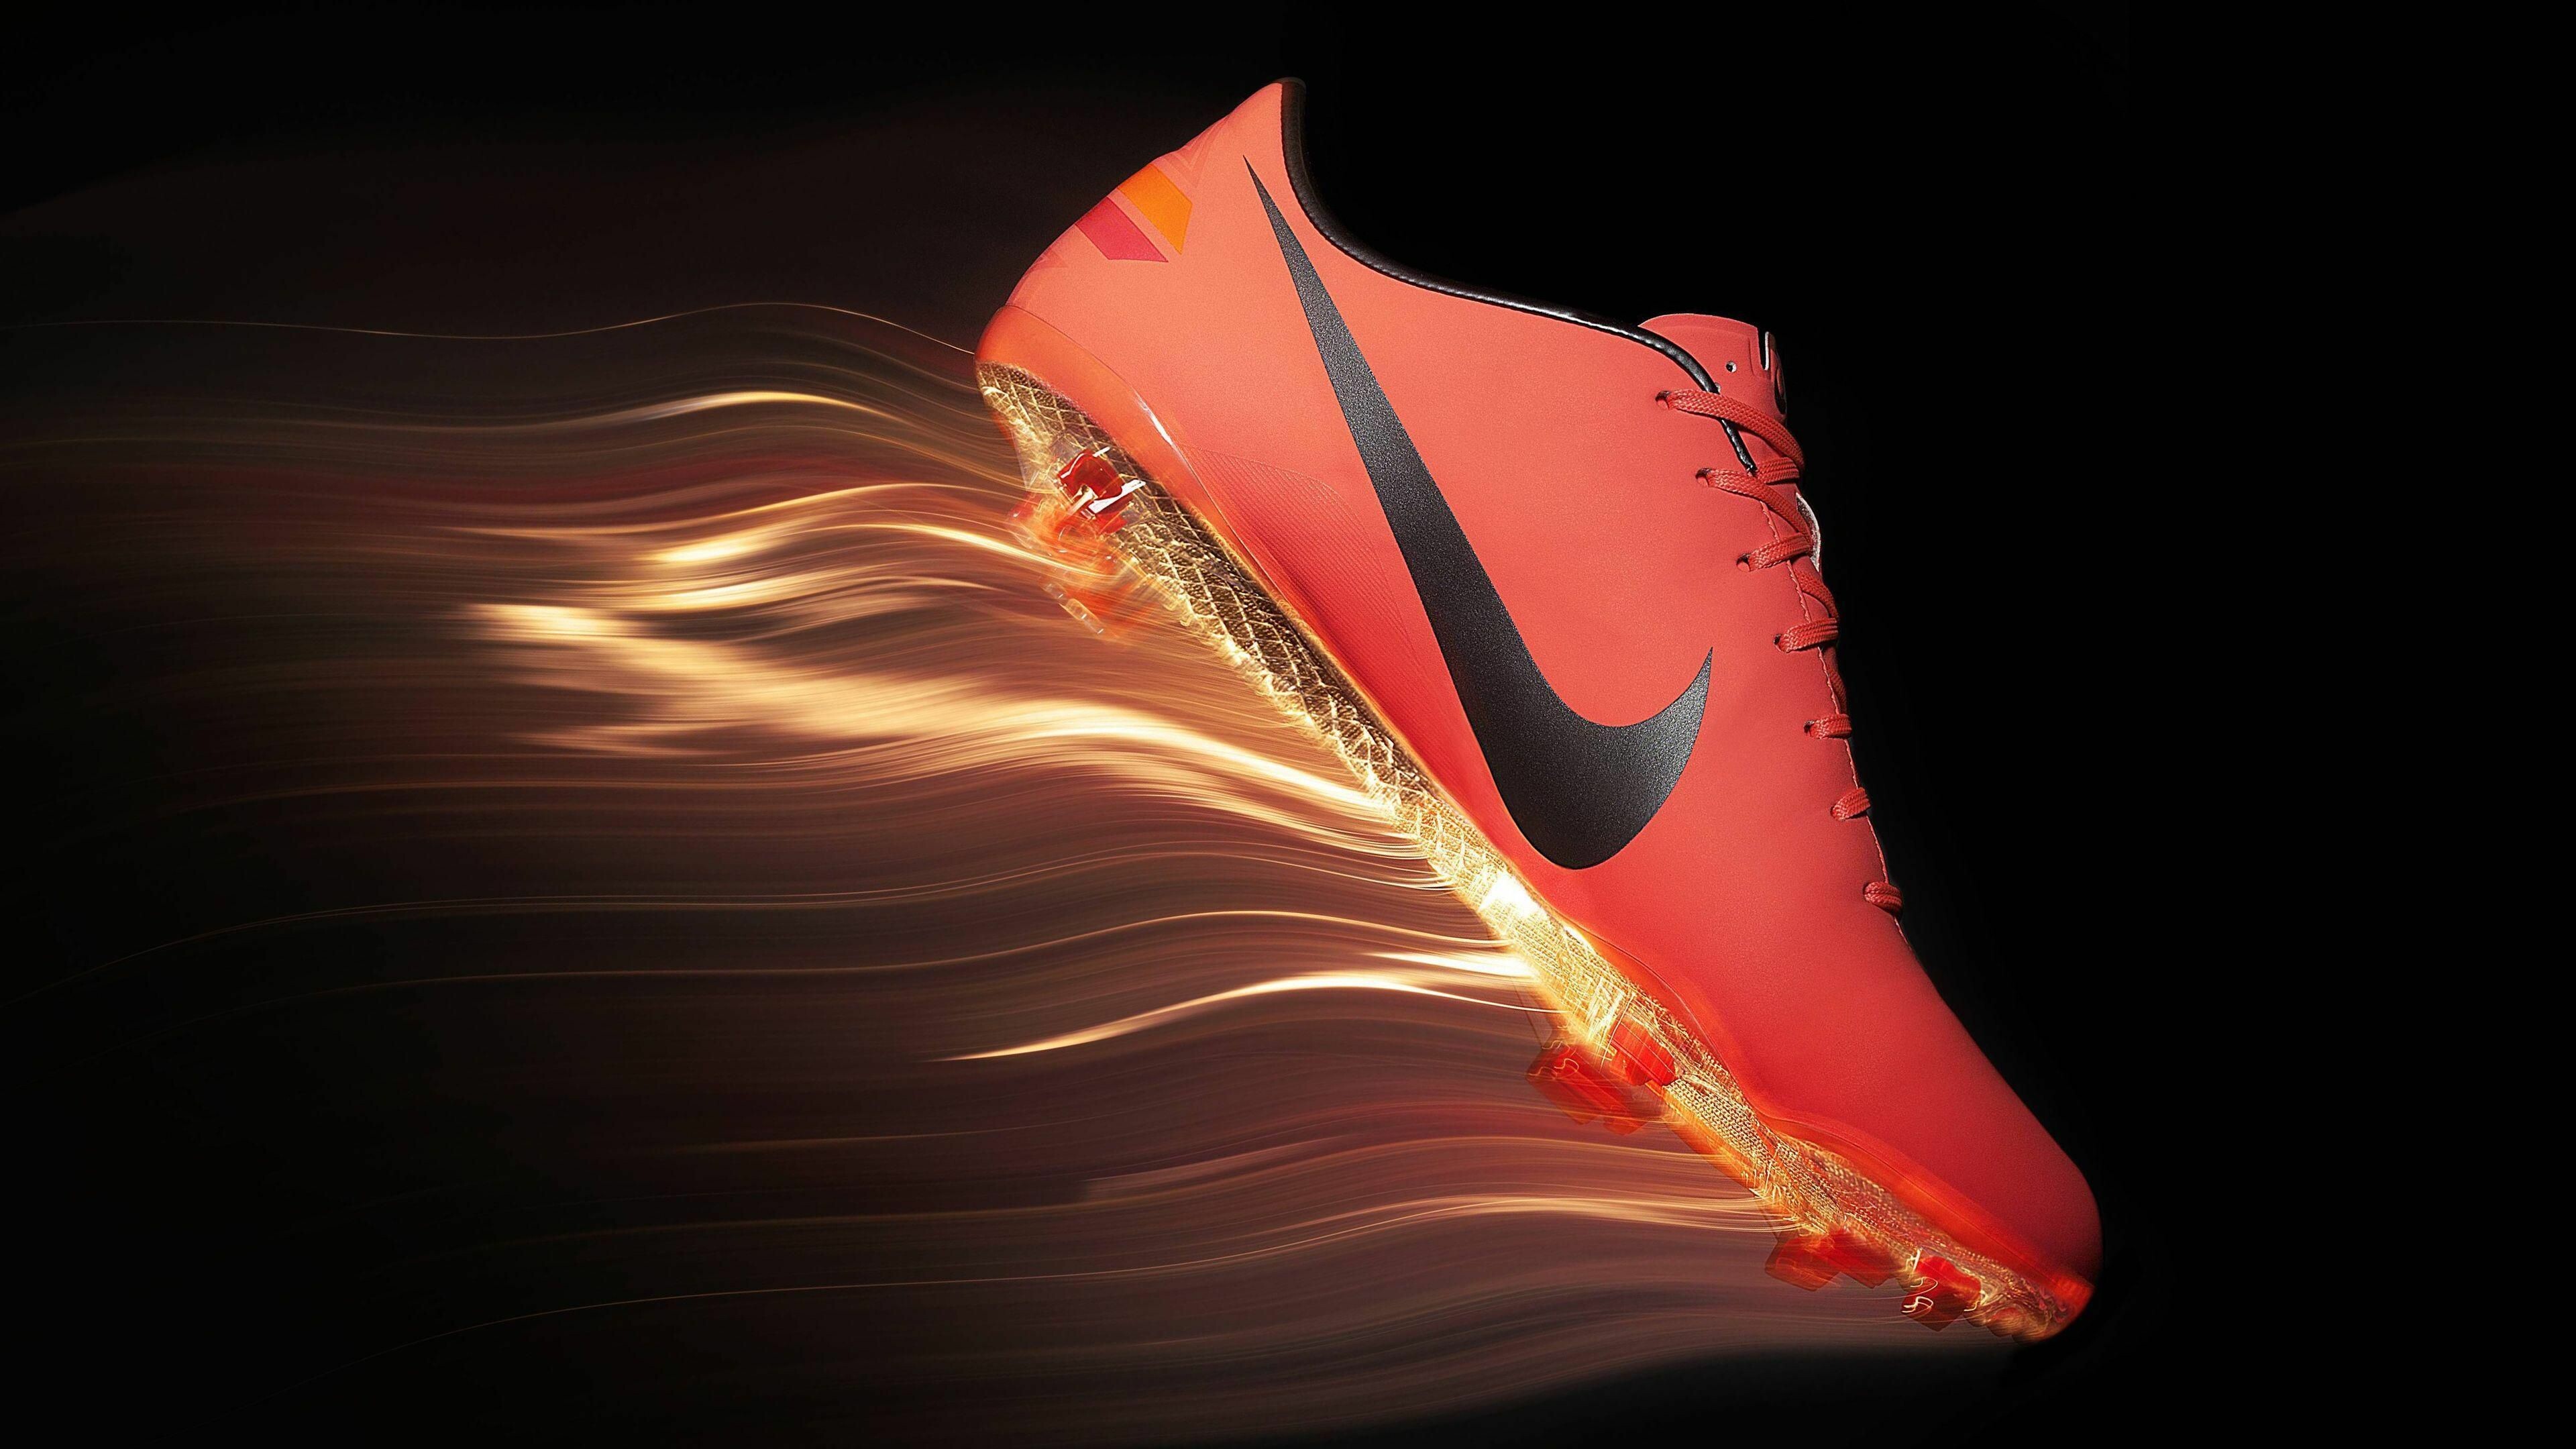 Nike: The world's largest athletic apparel company, Footwear. 3840x2160 4K Background.